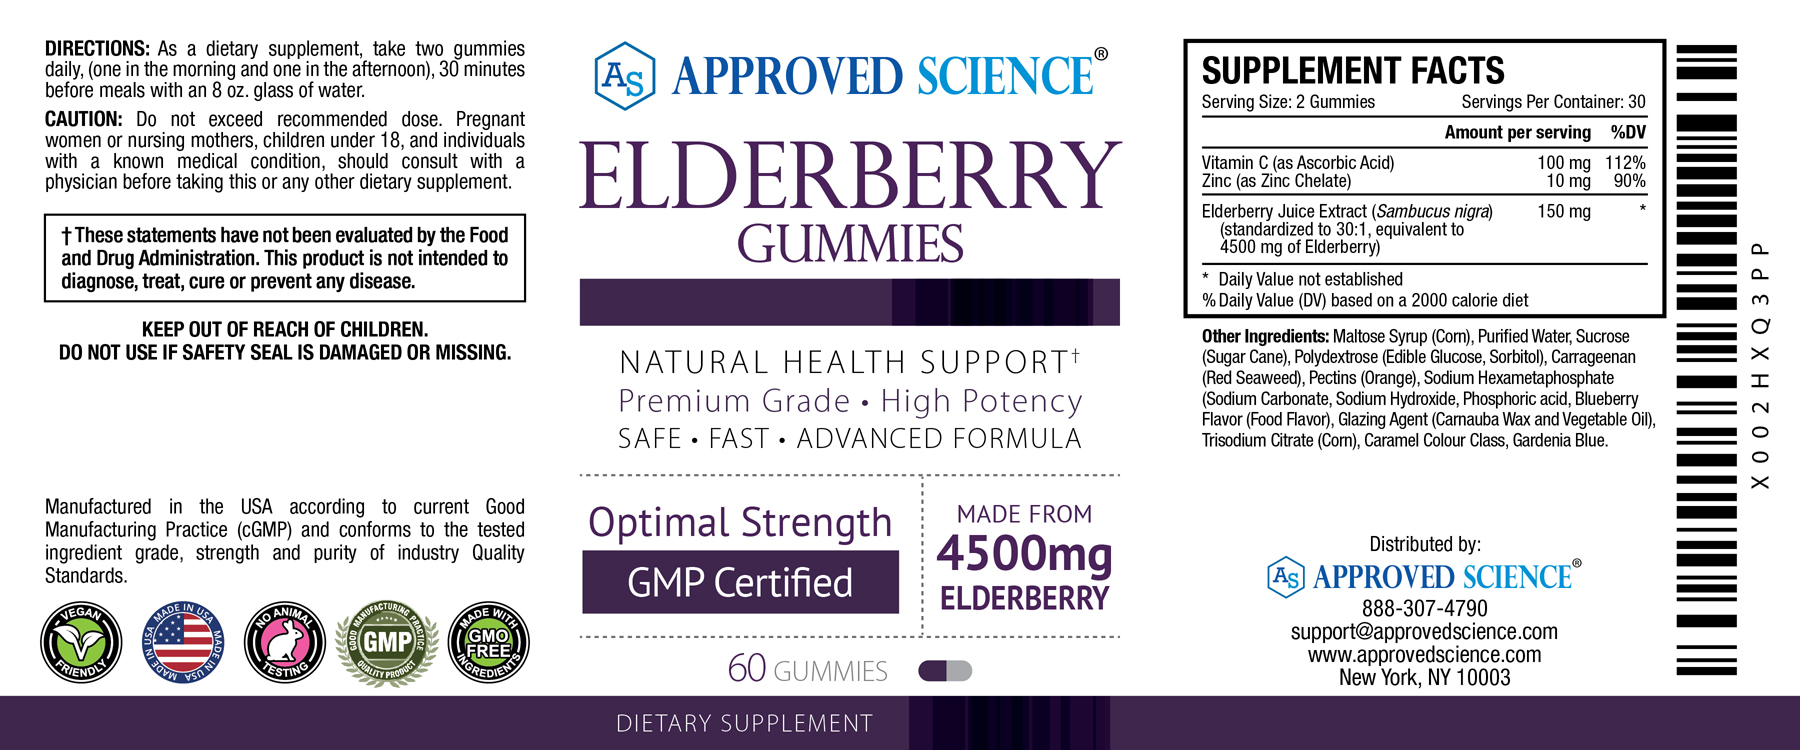 Approved Science® Elderberry Gummies Supplement Facts